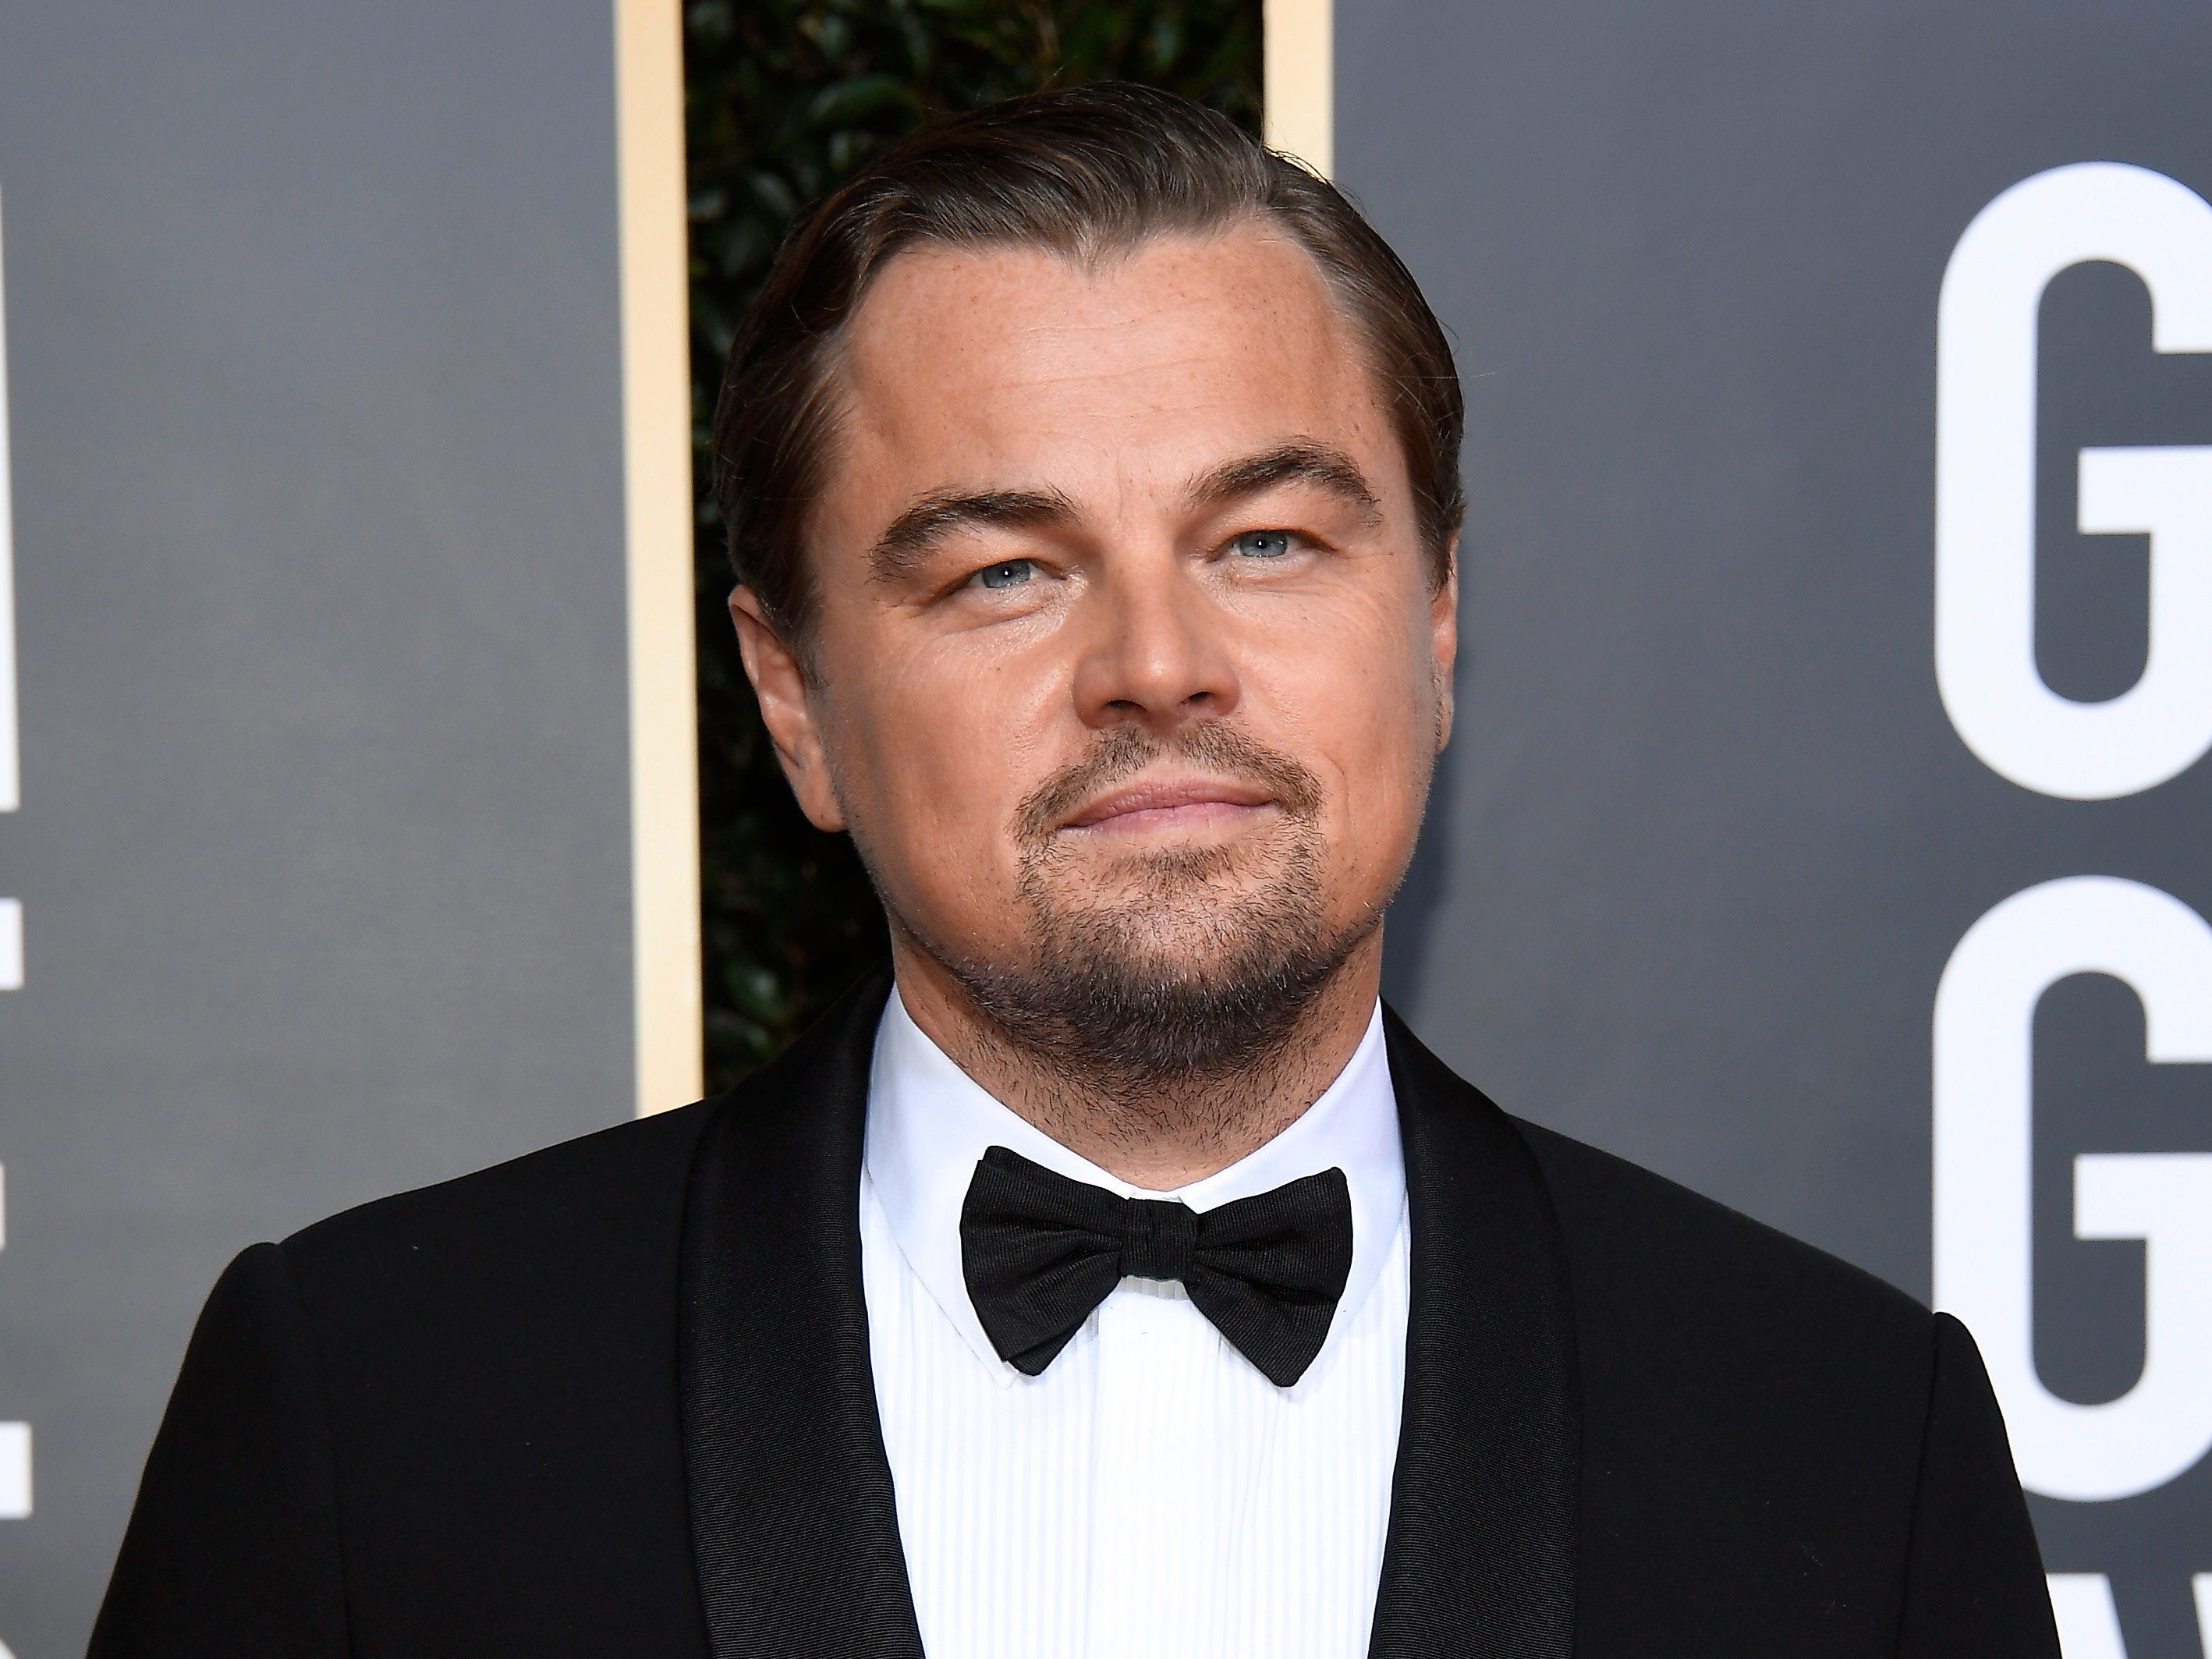 Ricky Gervais Made Fun of Leonardo DiCaprio's Dating Habits at